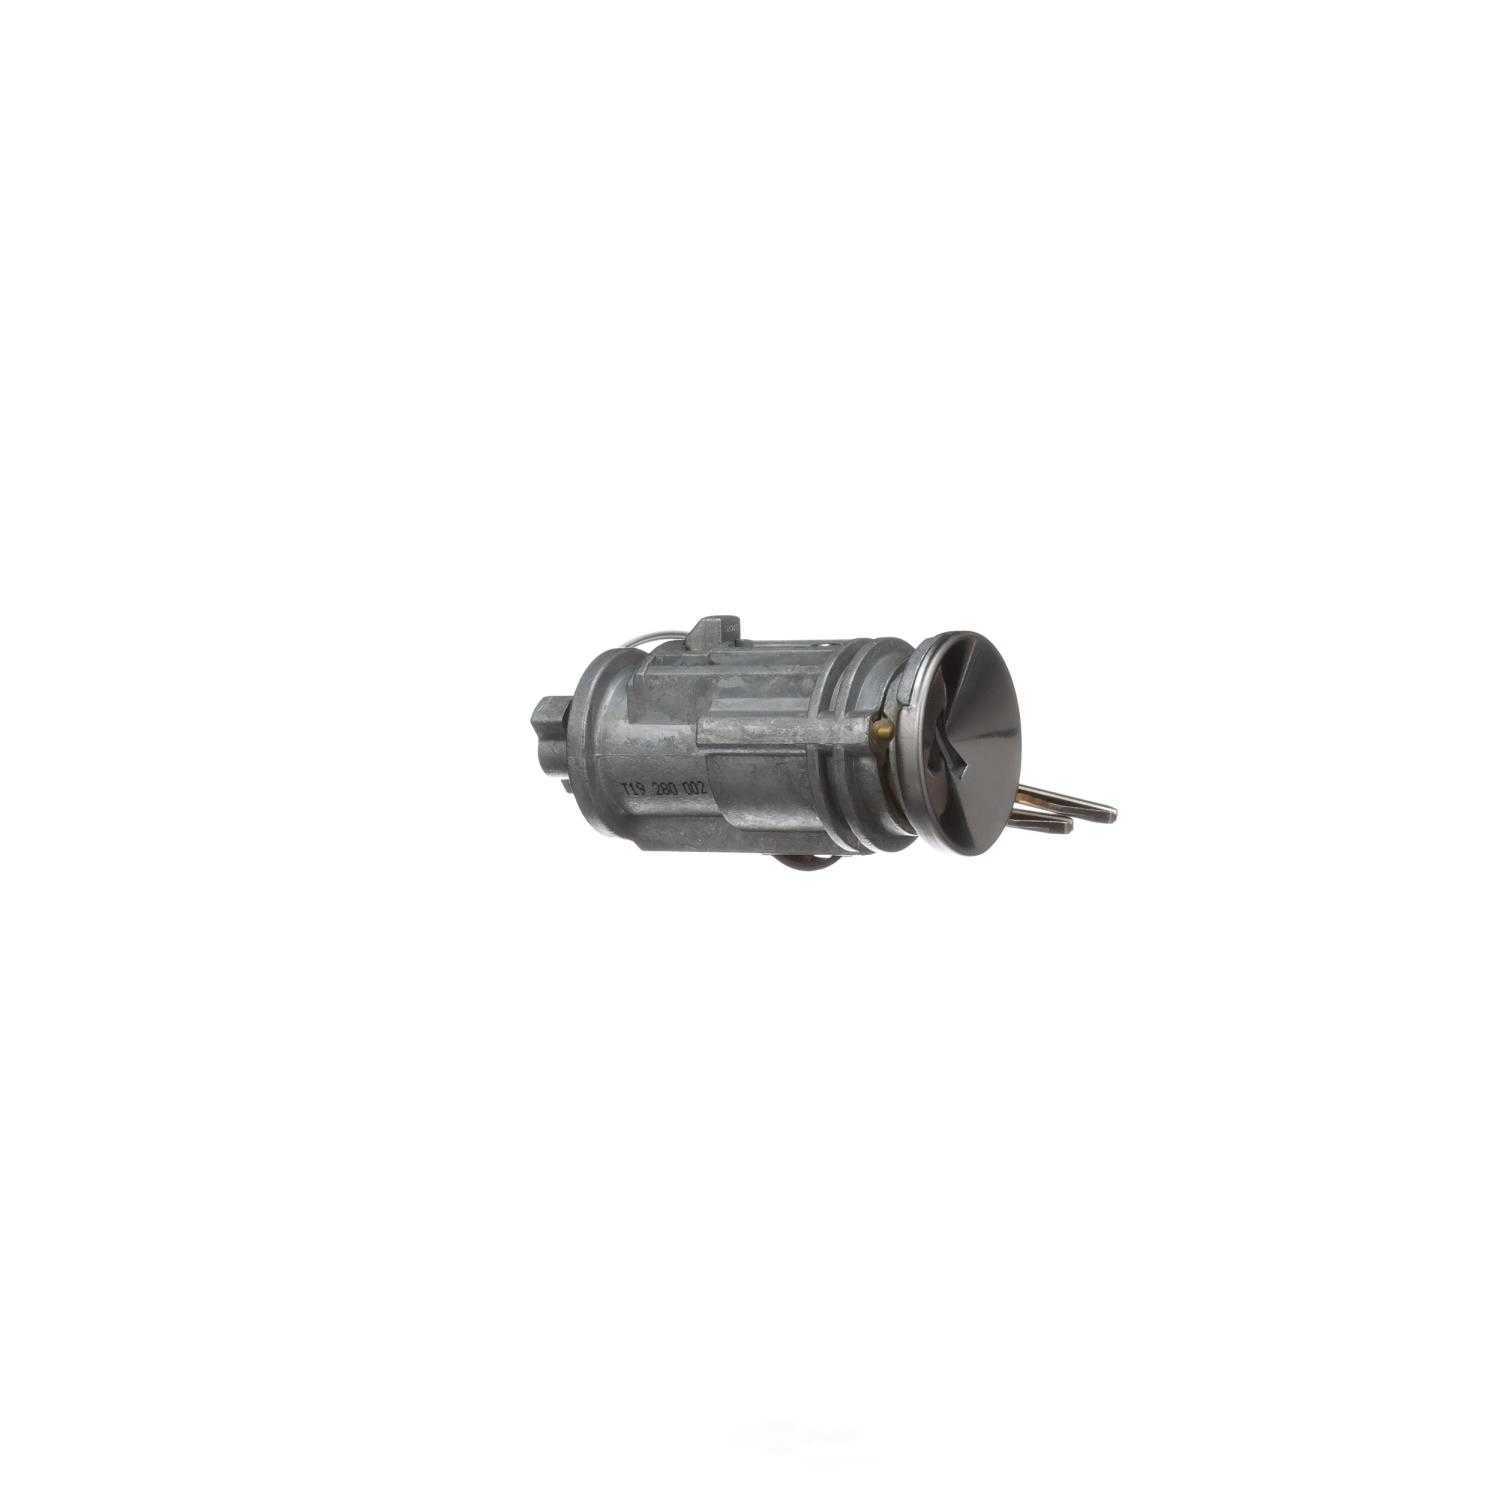 STANDARD MOTOR PRODUCTS - Ignition Lock Cylinder - STA US-285L